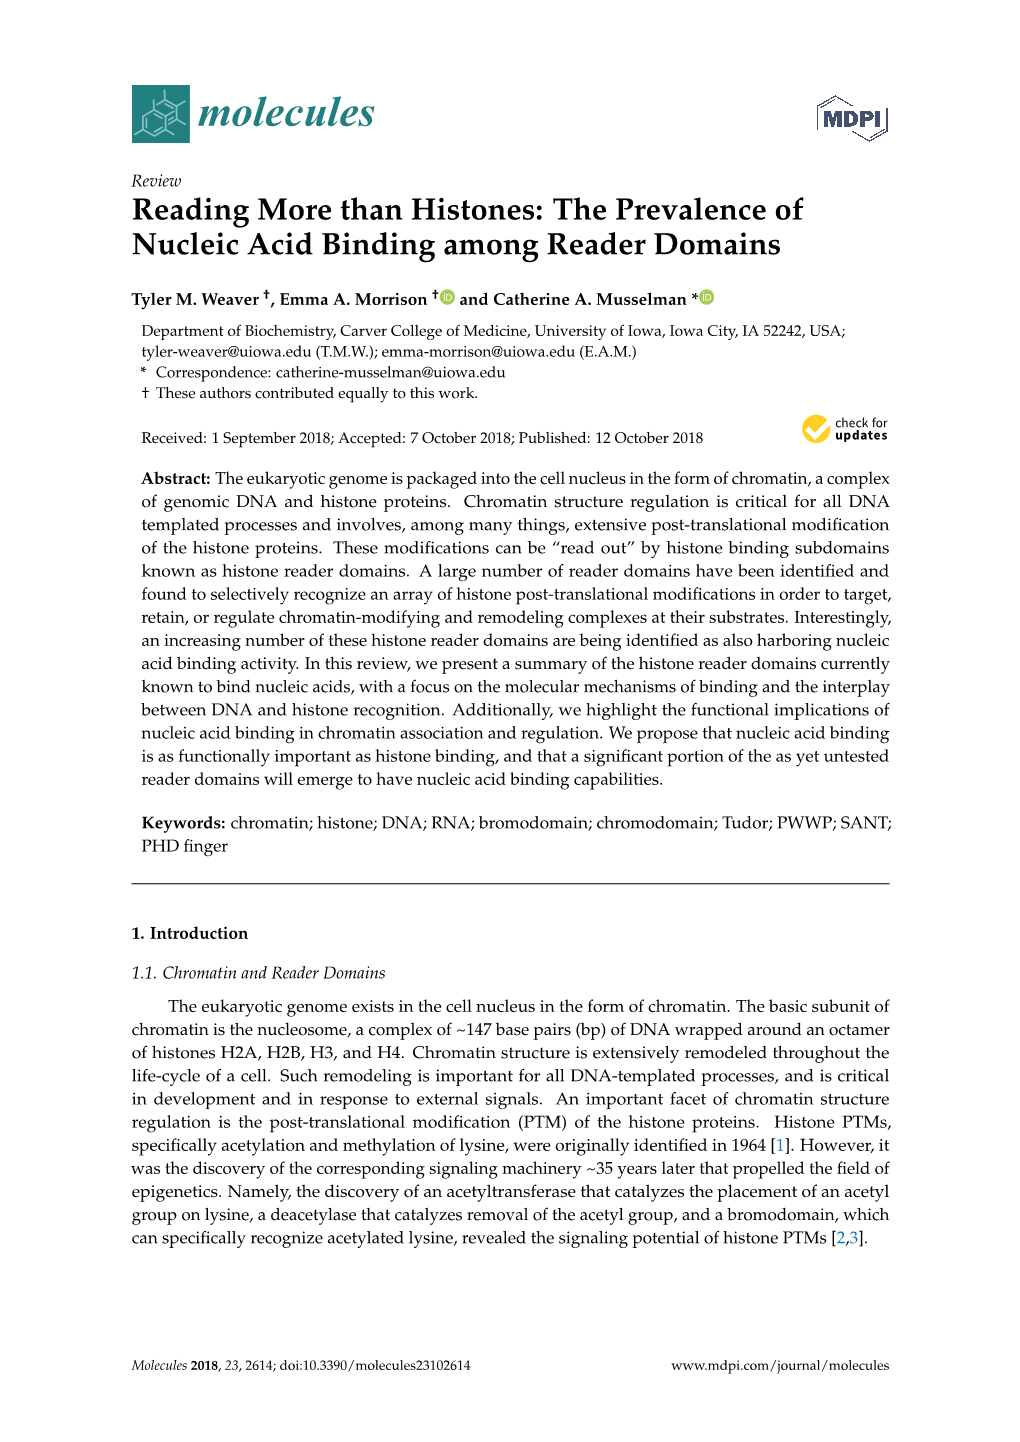 The Prevalence of Nucleic Acid Binding Among Reader Domains